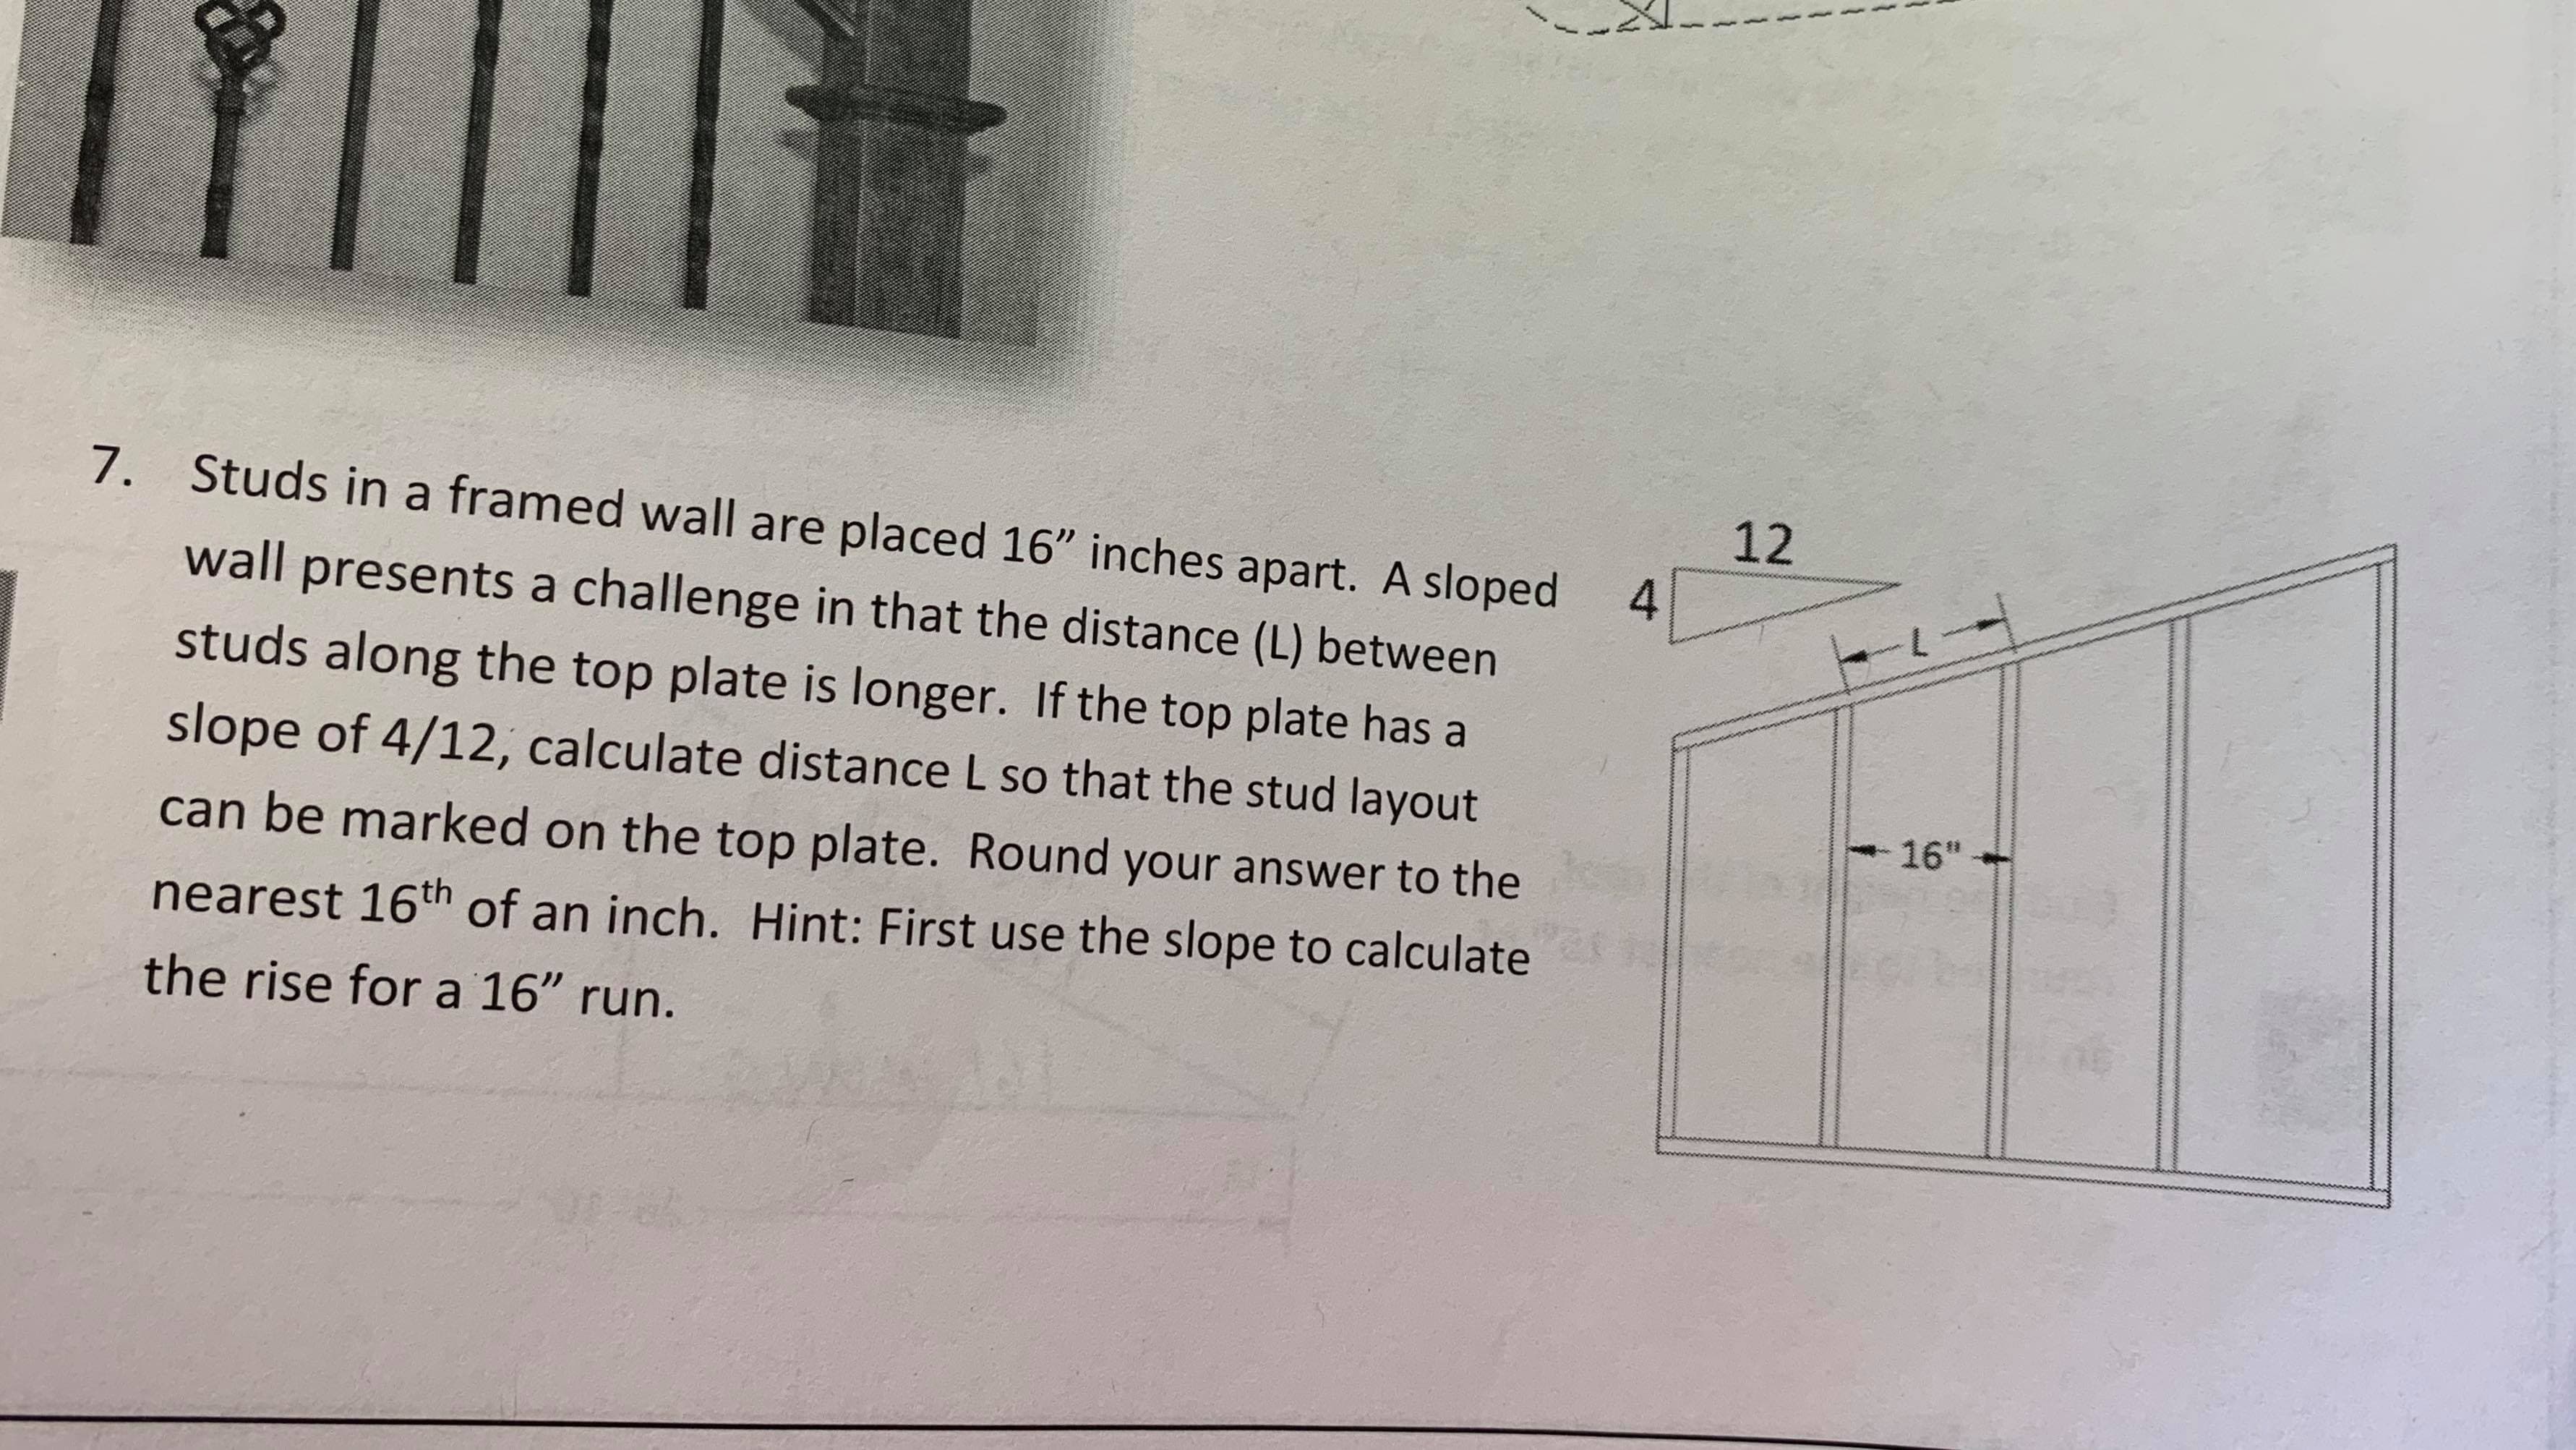 7. Studs in a framed wall are placed 16" inches apart. A sloped
12
wall presents a challenge in that the distance (L) between
--
studs along the top plate is longer. If the top plate has
slope of 4/12, calculate distance L so that the stud layout
16"
can be marked on the top plate. Round your answer to the
nearest 16th of an inch. Hint: First use the slope to calculate
the rise for a 16" run.
